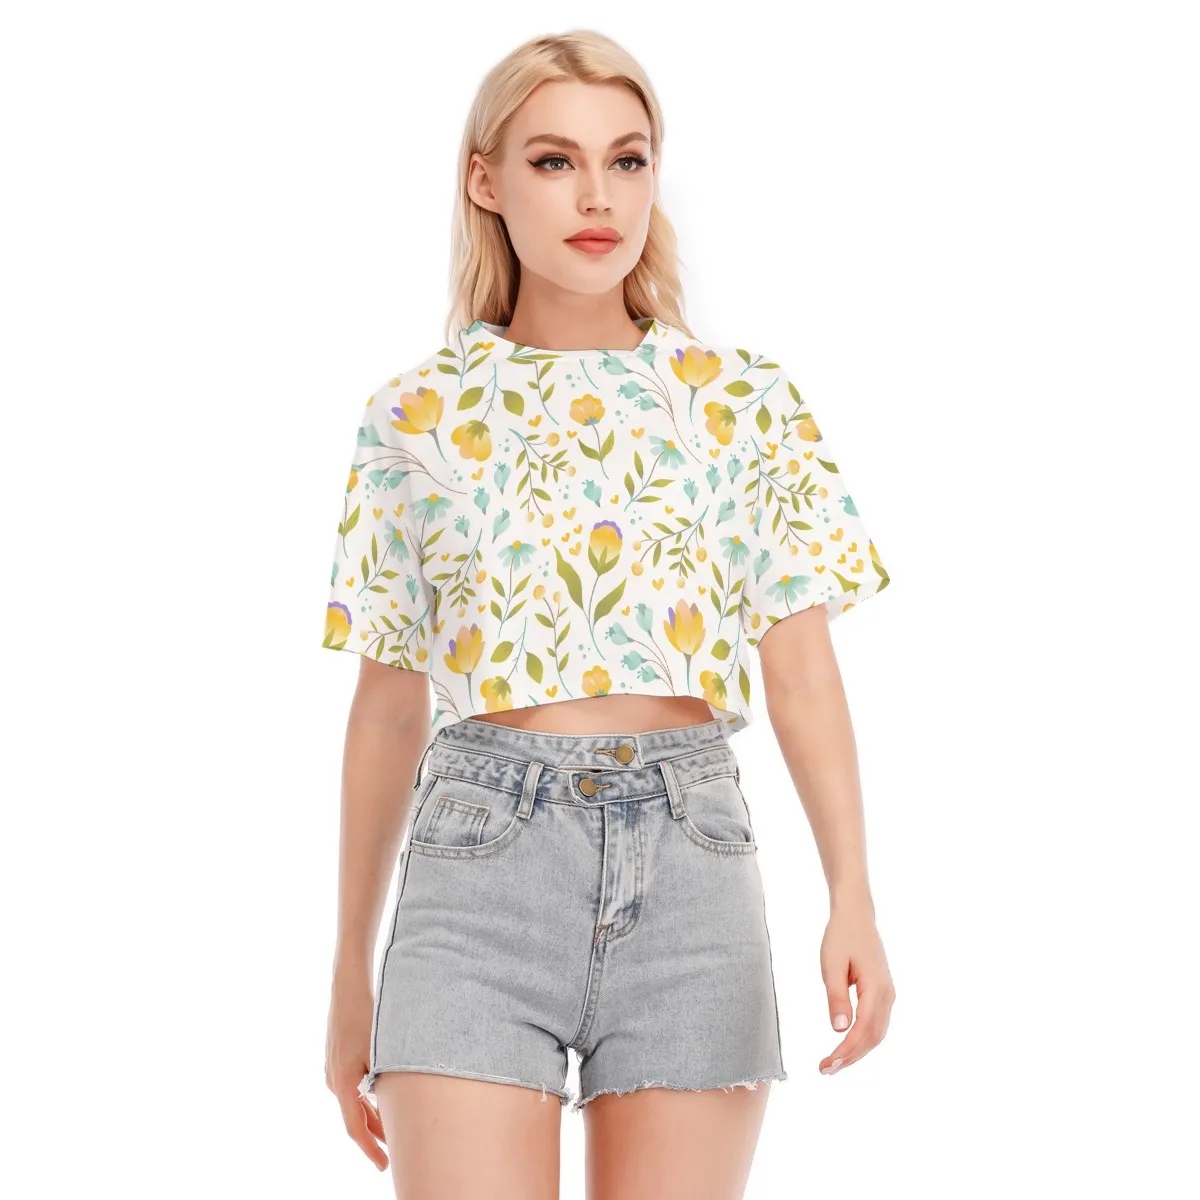 Women’s Cotton Cropped Top